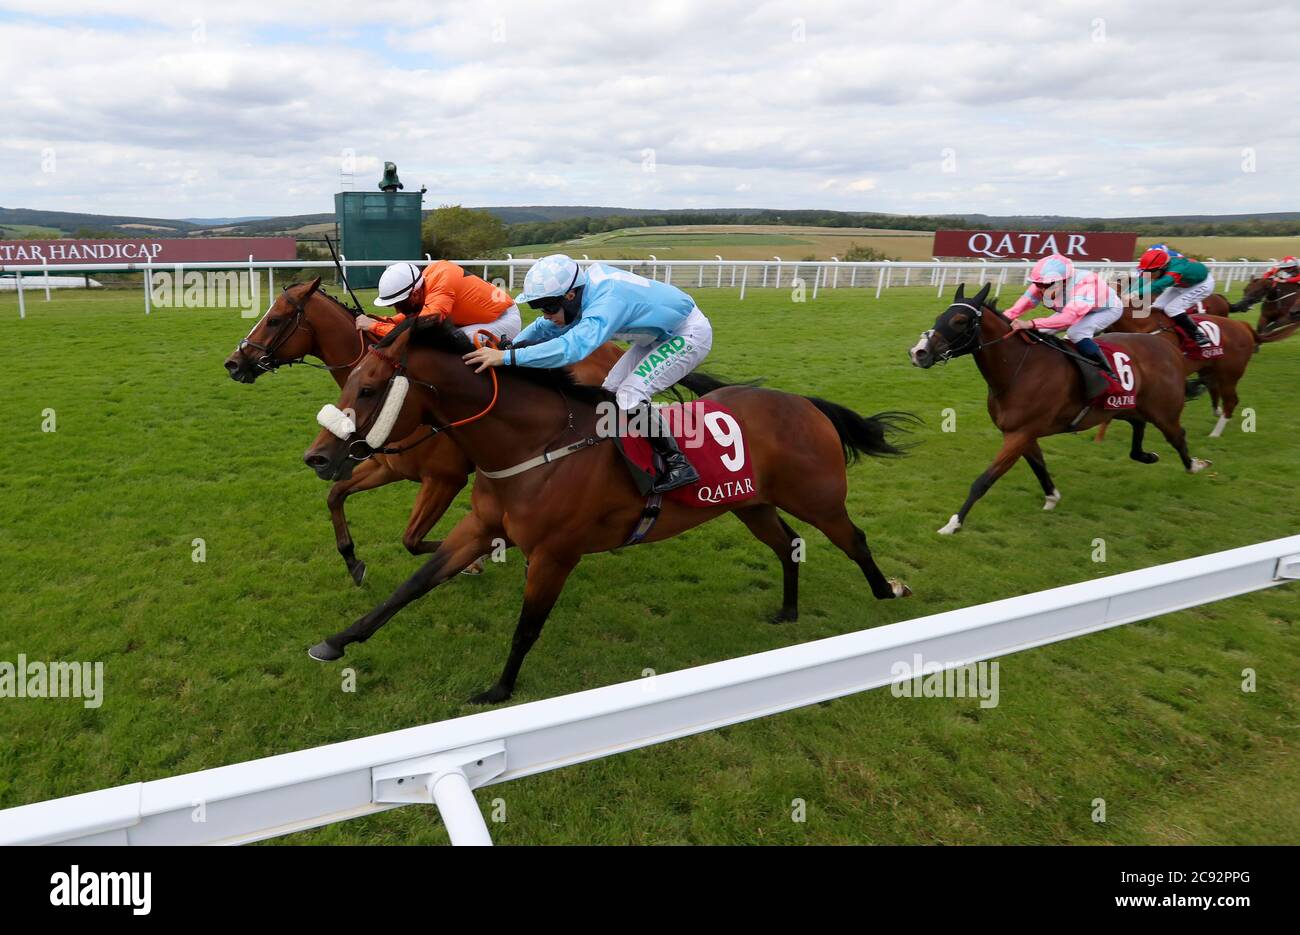 Only Spoofing ridden by Kieran OÕNeill (back left) wins The Qatar Handicap during day one of the Goodwood Festival at Goodwood Racecourse, Chichester. Stock Photo